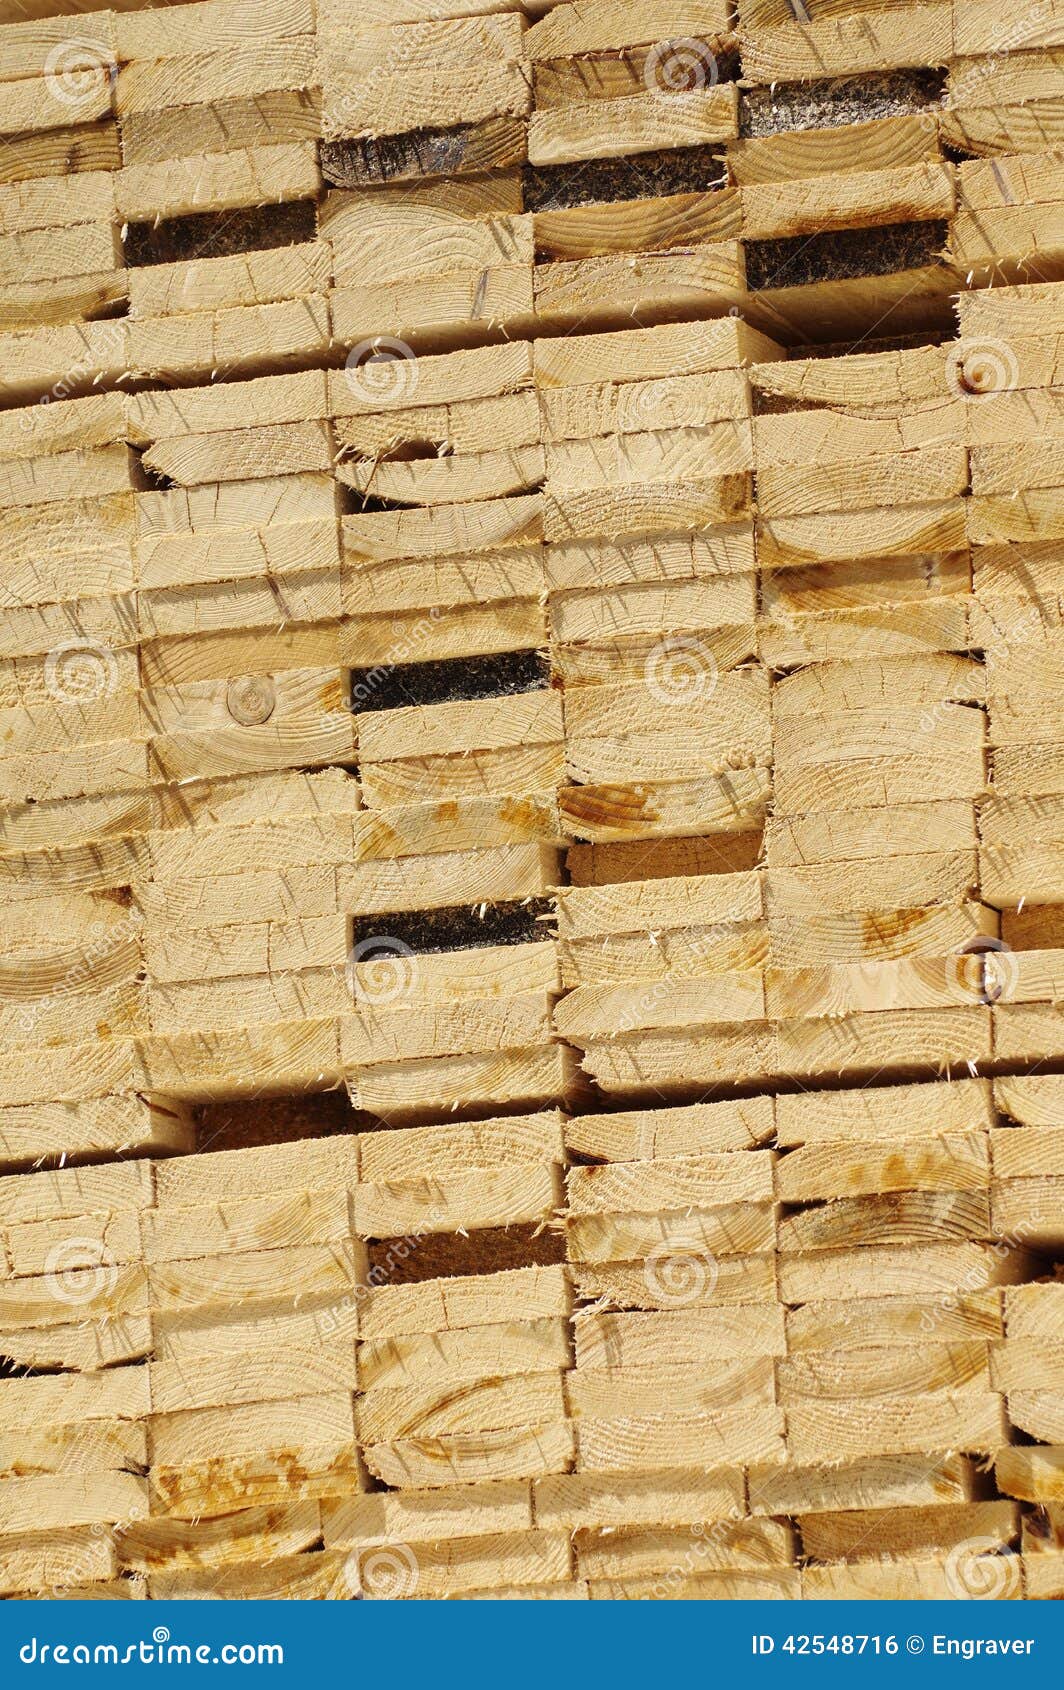 Battens backgrounds 2. Battens backgrounds objects industries timber